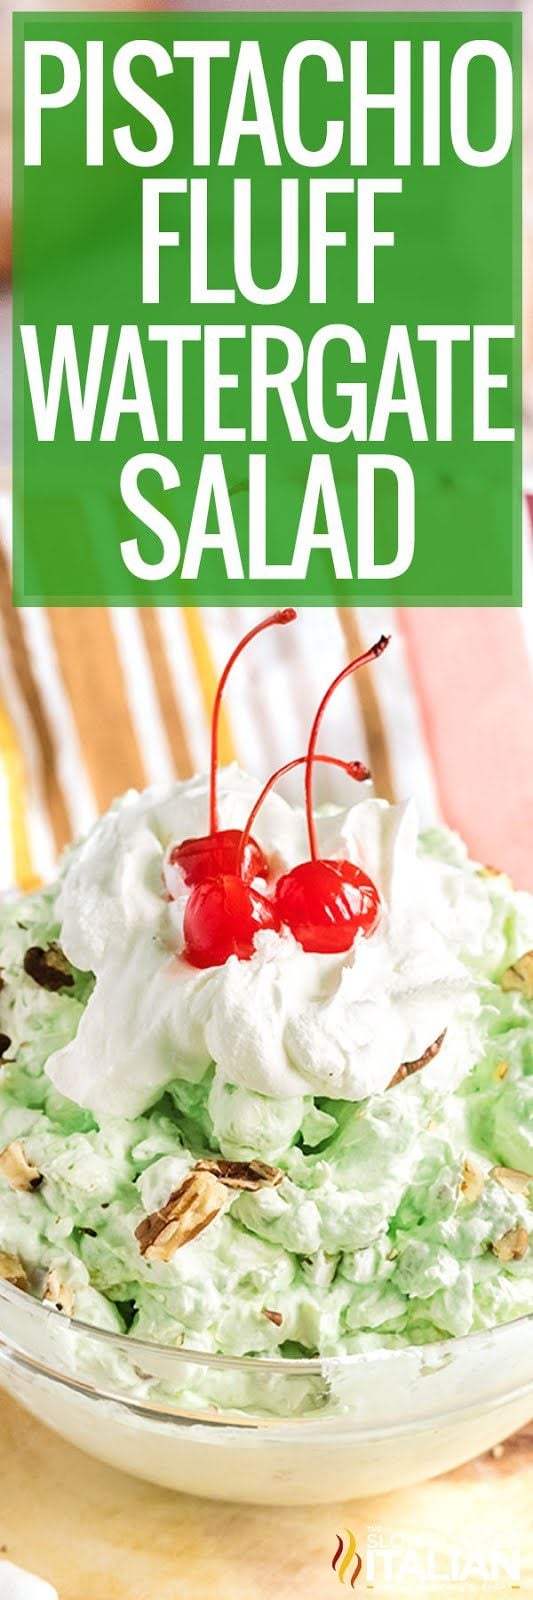 titled image (and shown): Pistachio Fluff Watergate Salad